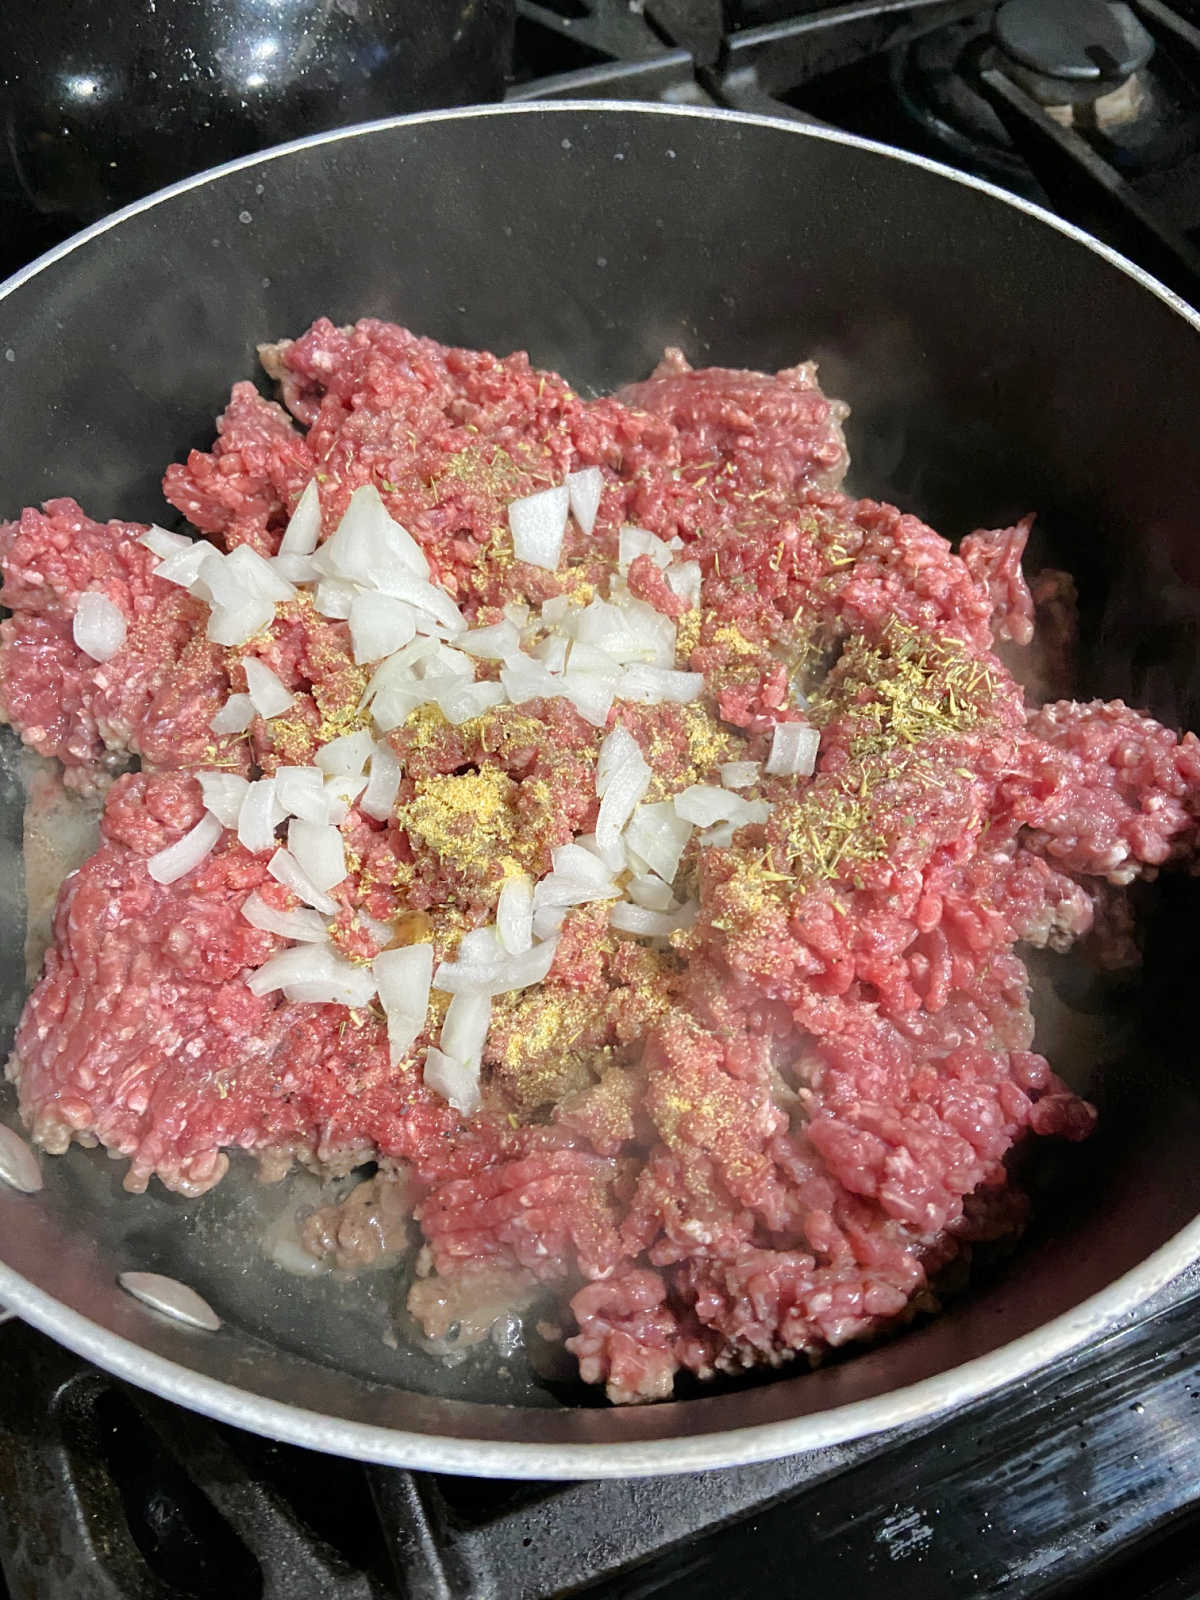 Ground beef cooking in a frying pan with diced onions on top.